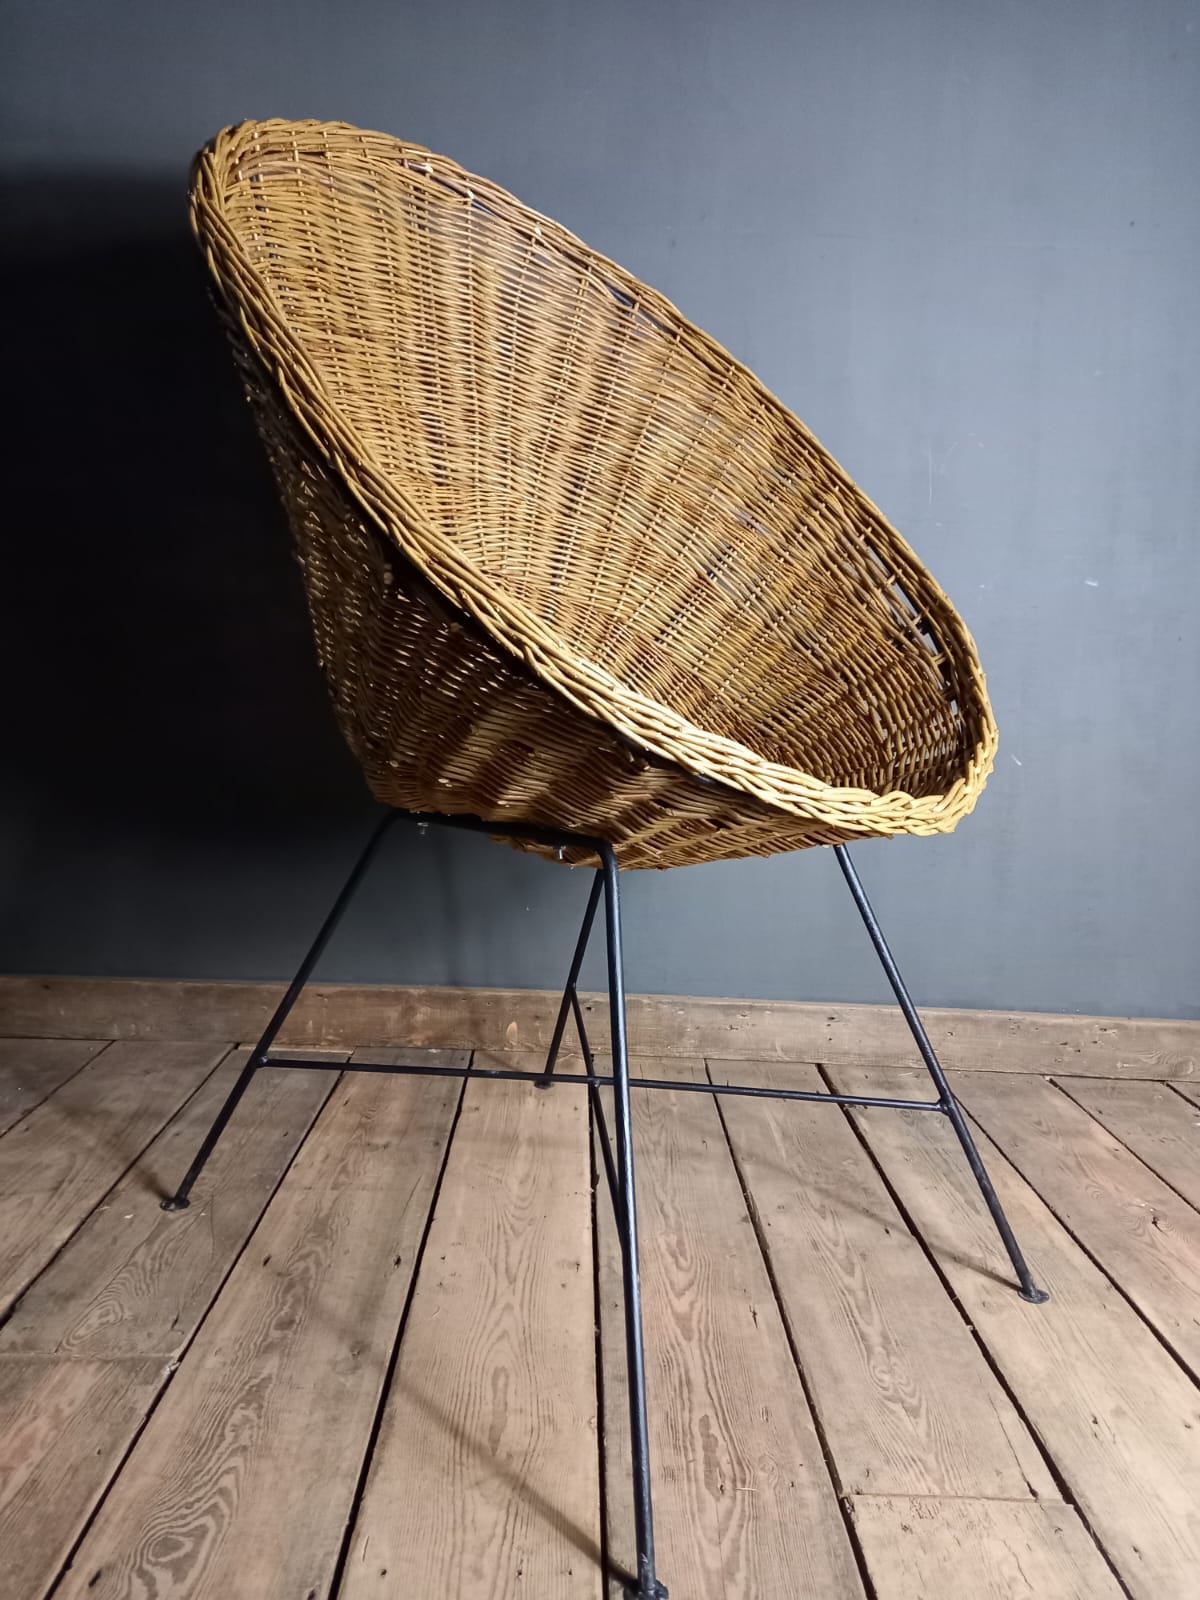 Weave Away Basketry Camp – Helen Munday’s woven chair